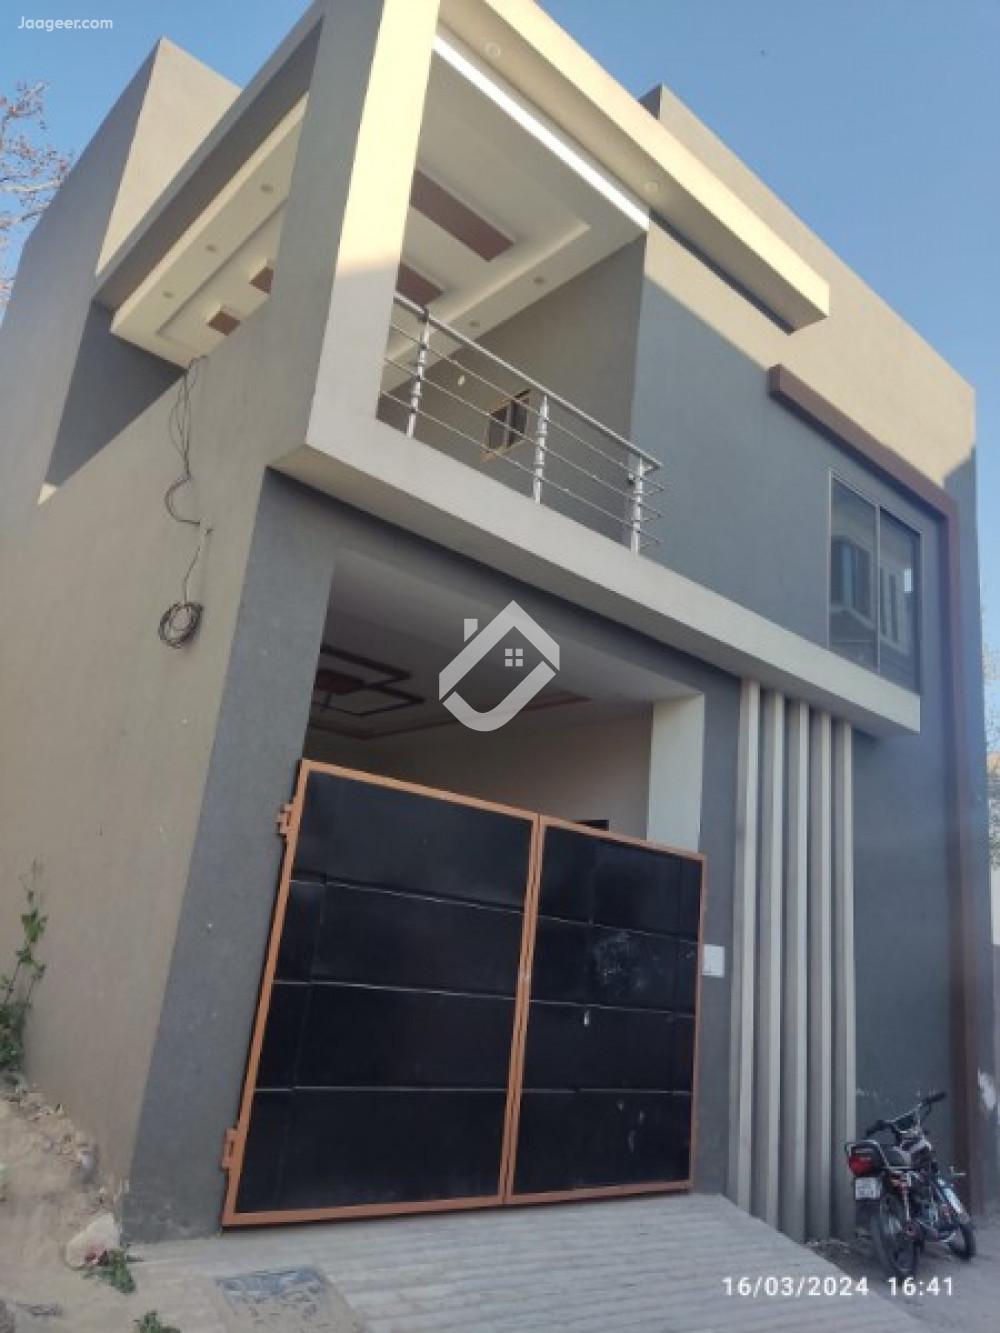 7 Marla House For Sale In Civil line in Civil Lines, Sheikhupura